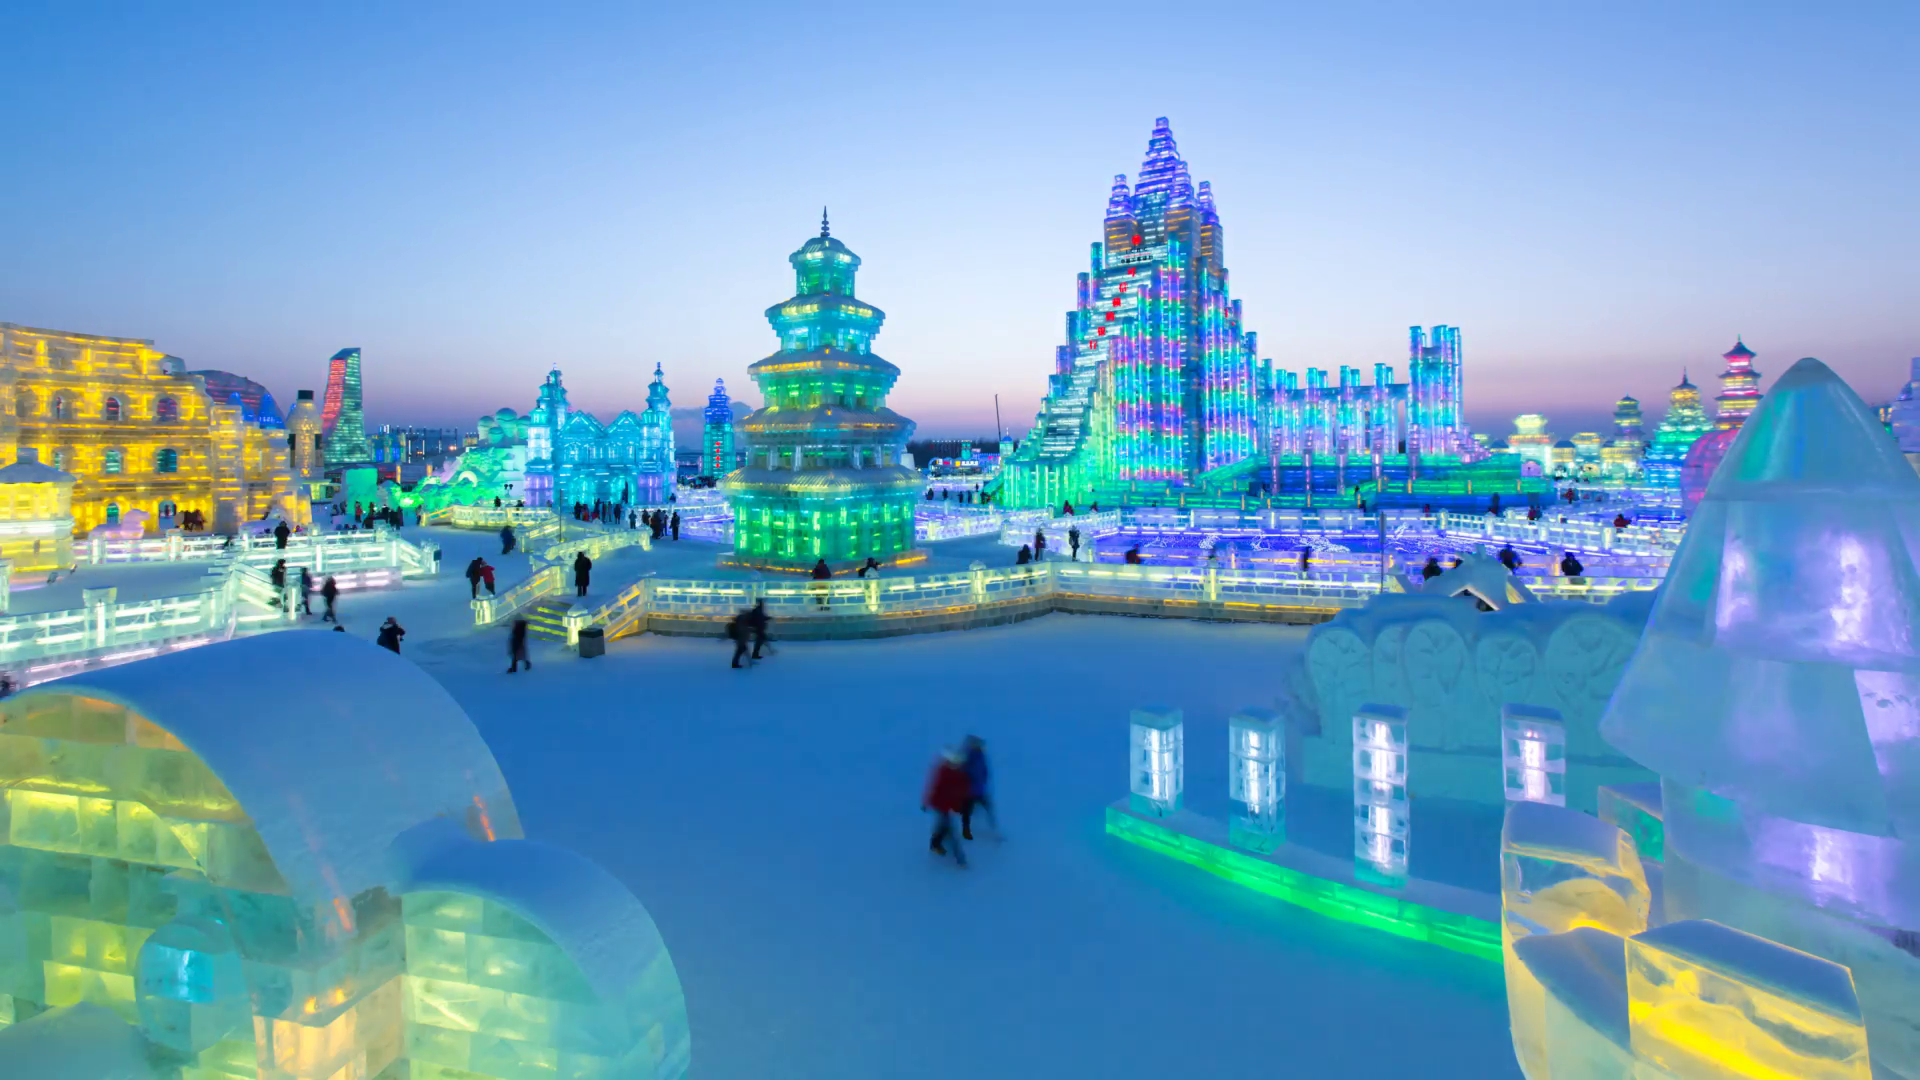 spectacular-illuminated-ice-sculptures-at-the-harbin-ice-and-snow-festival-in-heilongjiang-province-harbin-china_ek-q0fo__F0003png